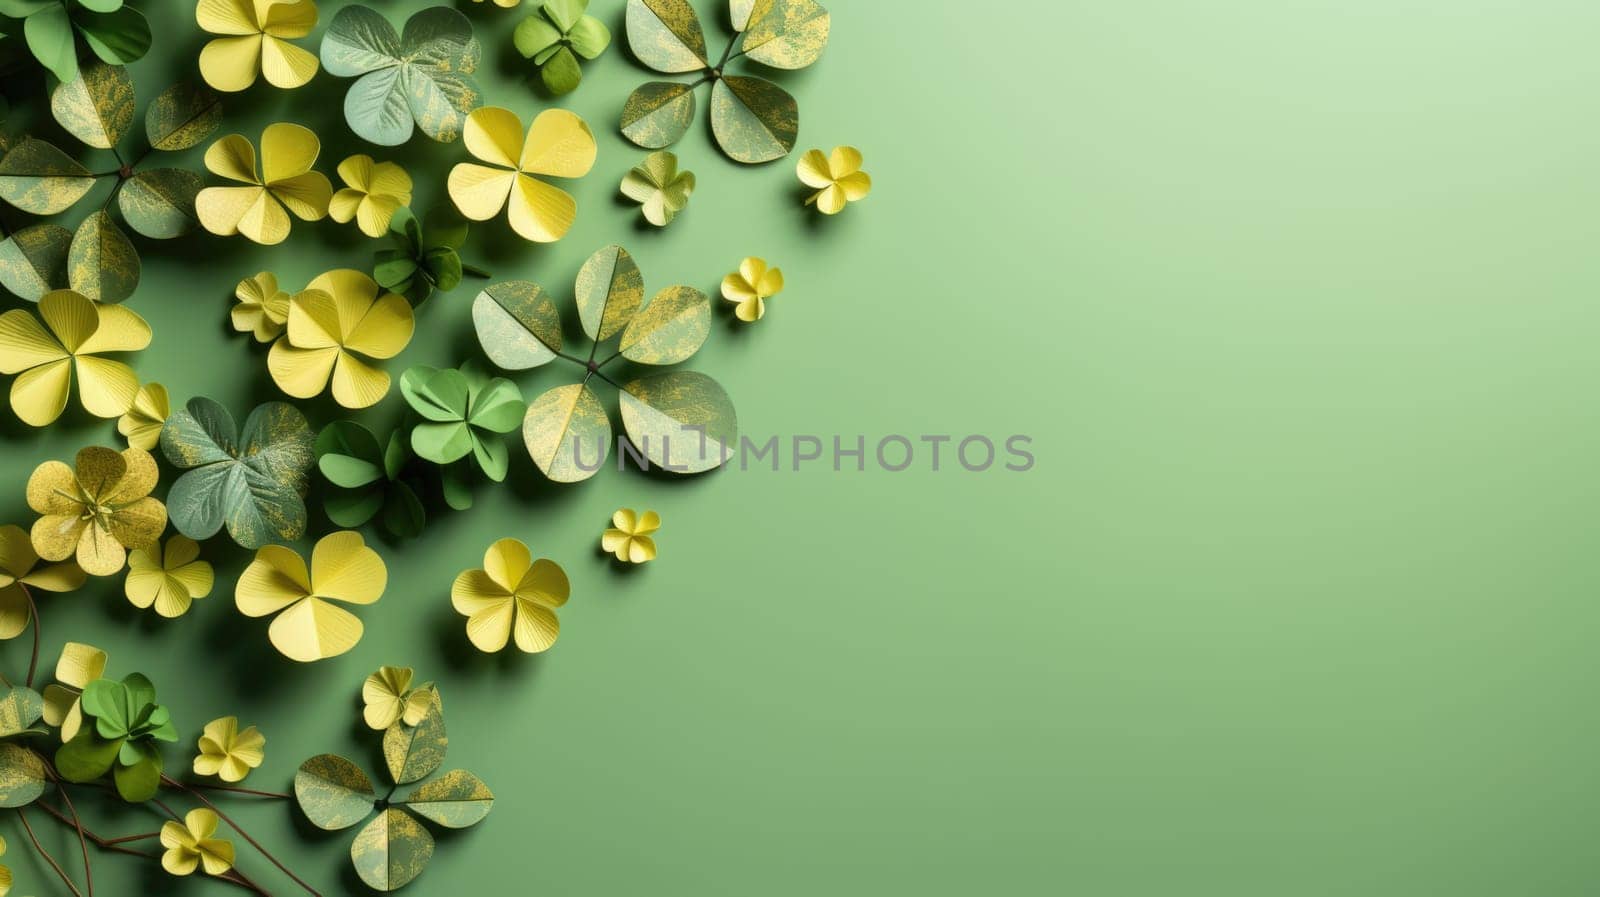 Assortment of green and yellow flowers arranged on a vibrant green backdrop.